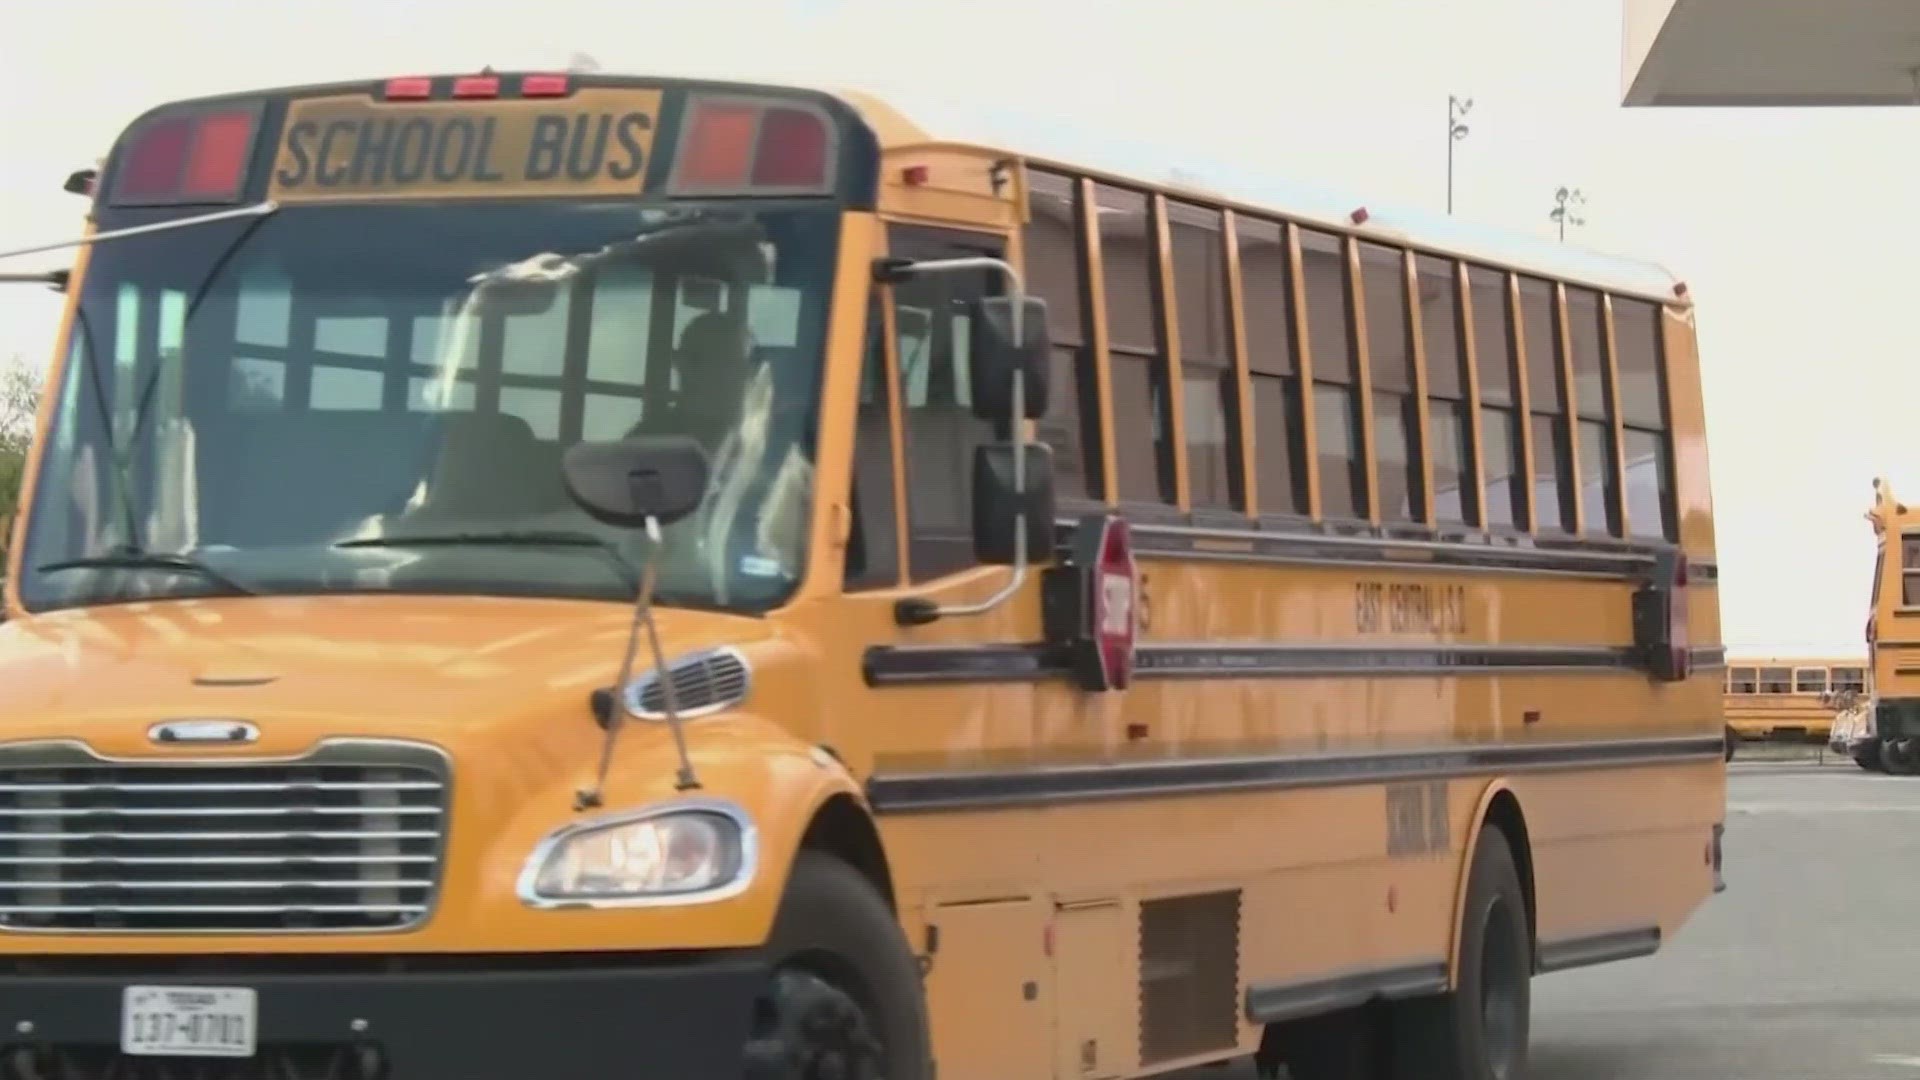 District officials say they don't have enough drivers to man their fleet of school buses. Instead, current drivers have been assigned to multiple routes.